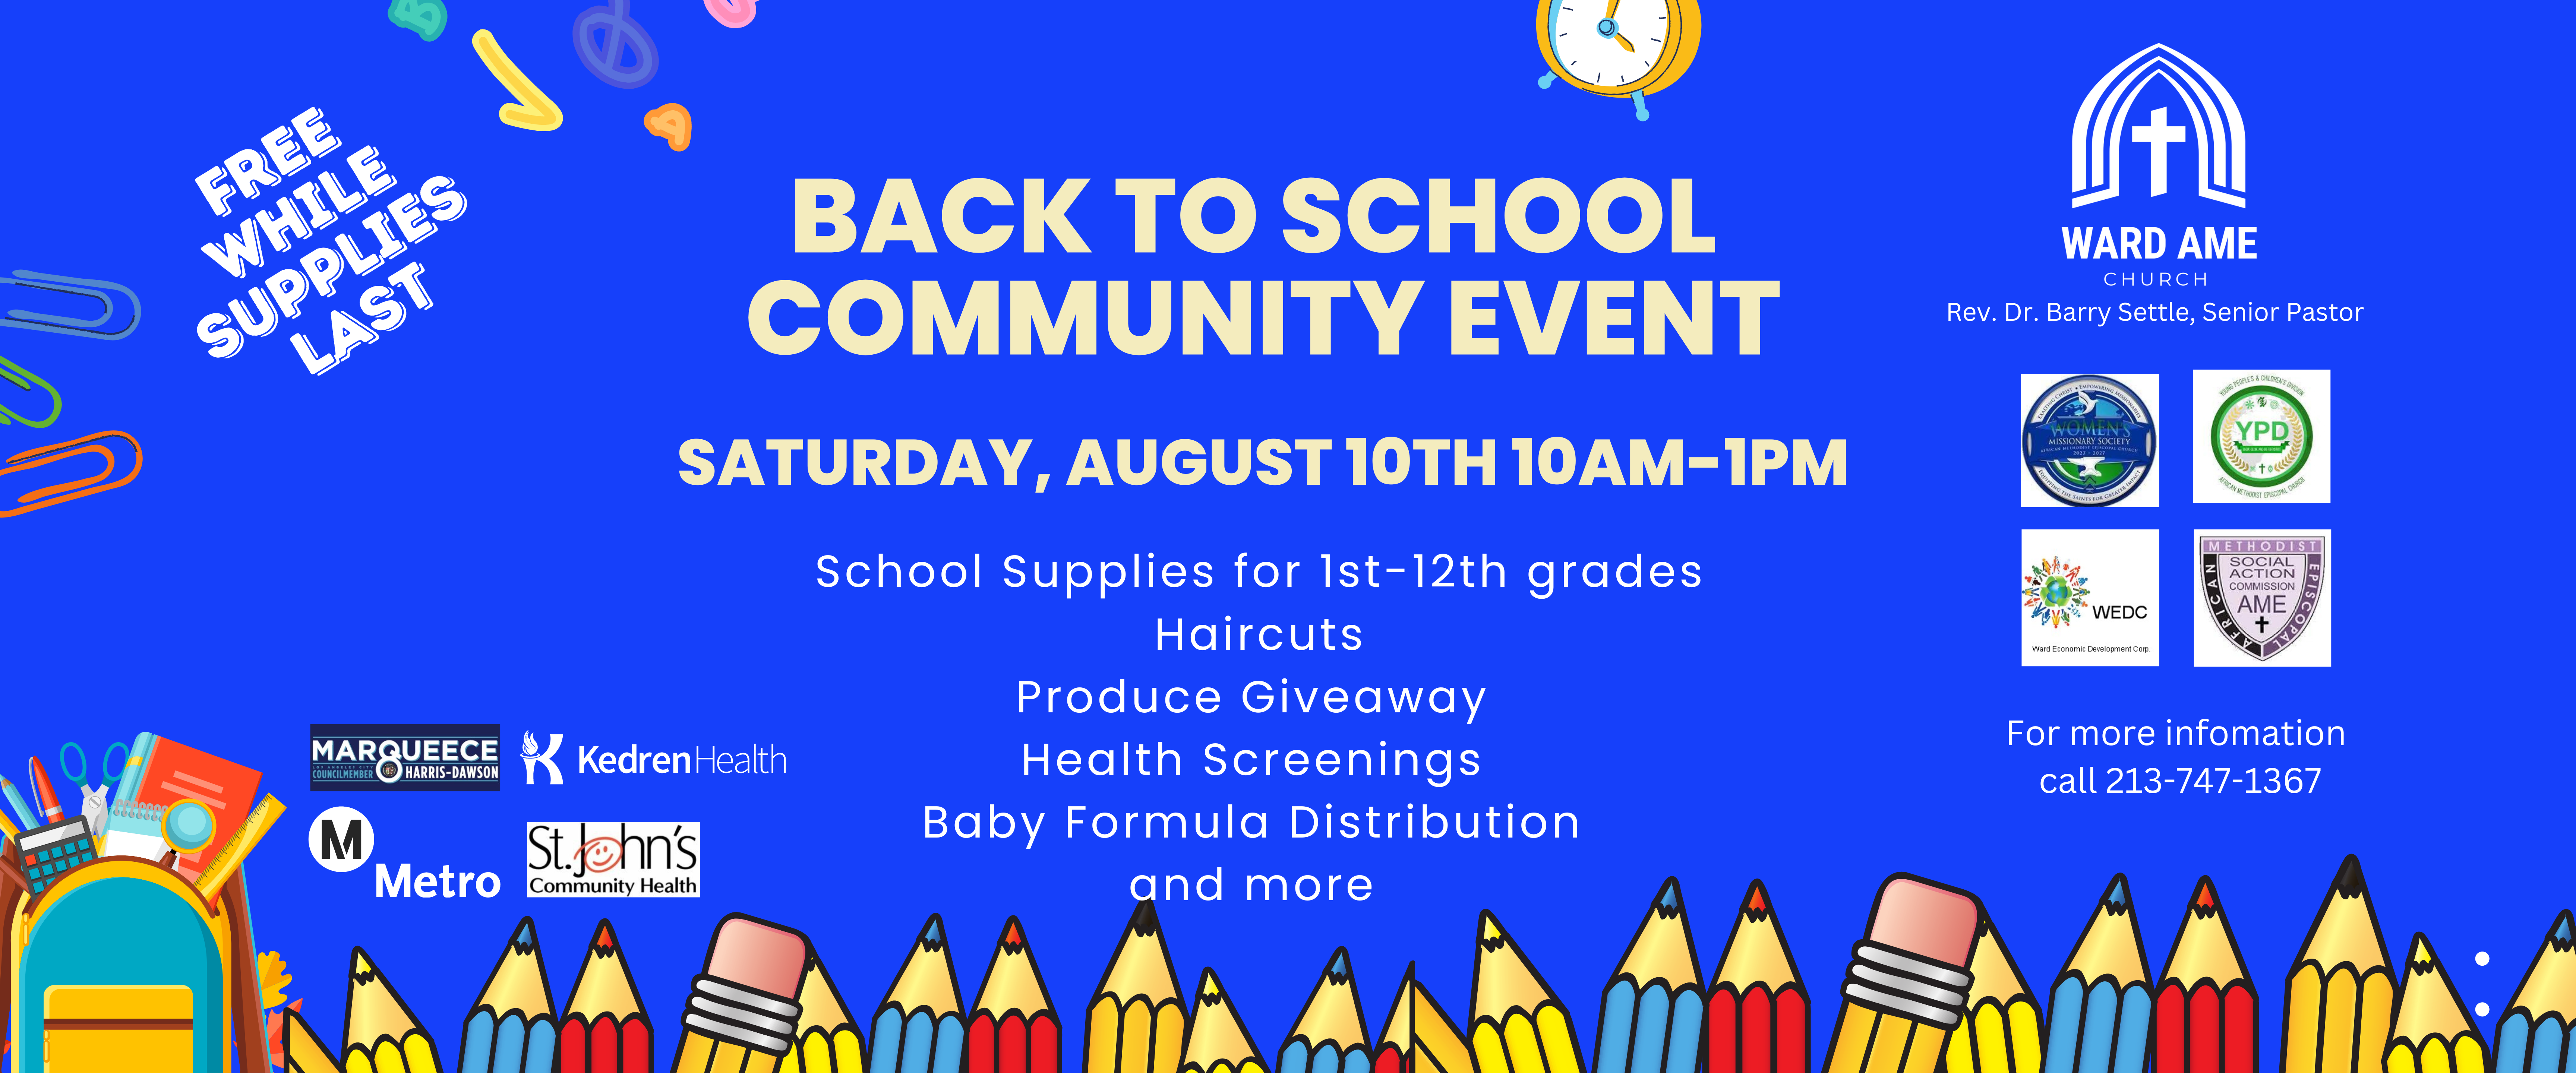 Back to school event